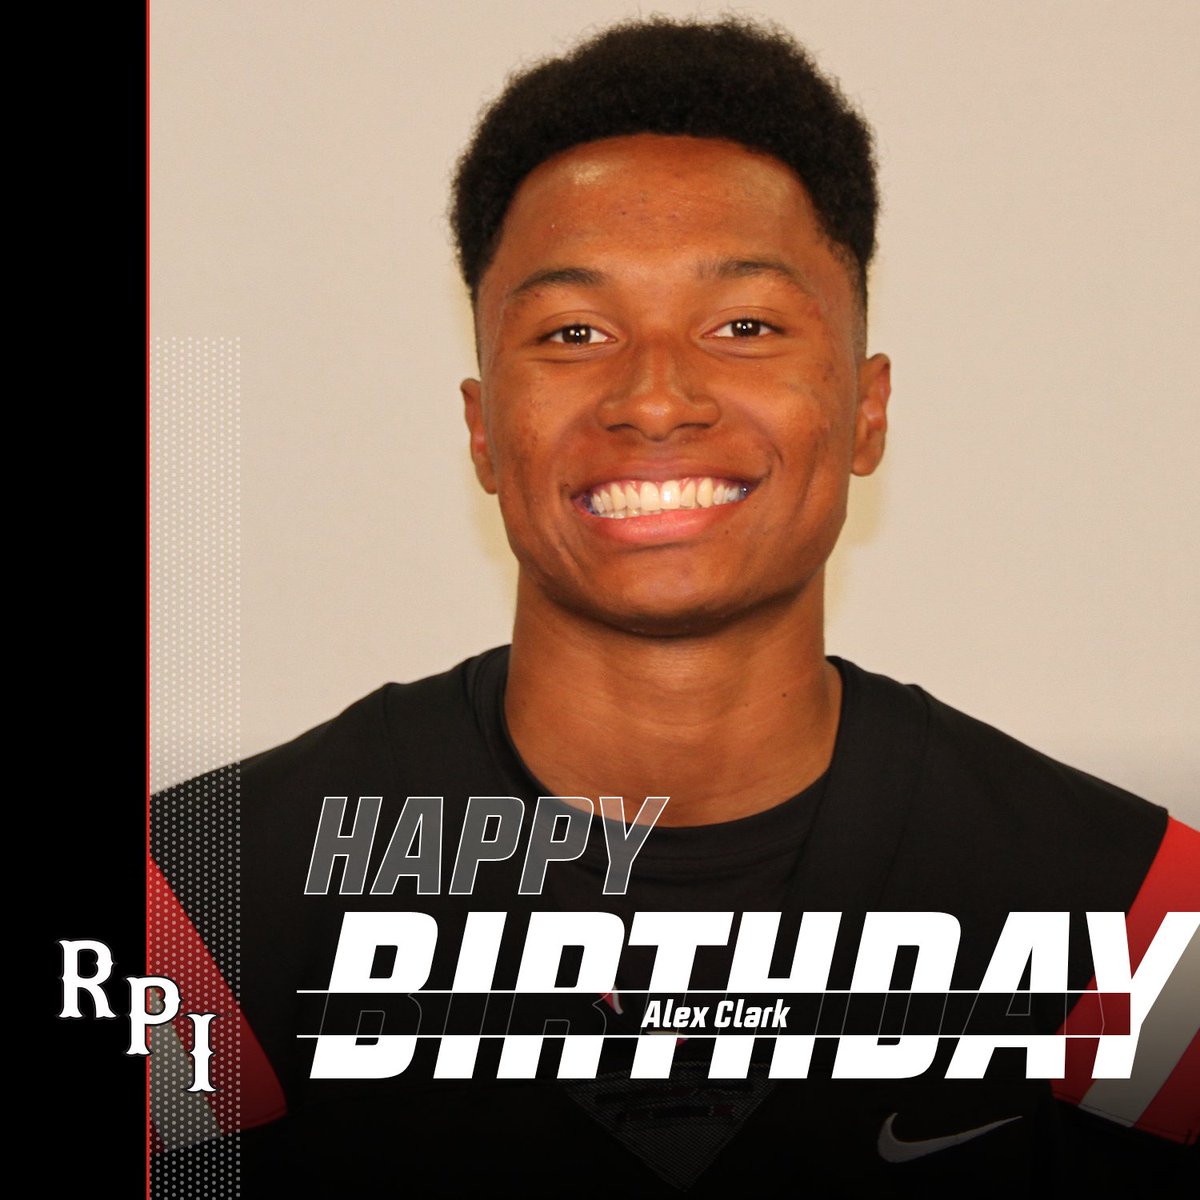 Happy Birthday to the older twin Alex Clark all the way from California!
#REDFAM